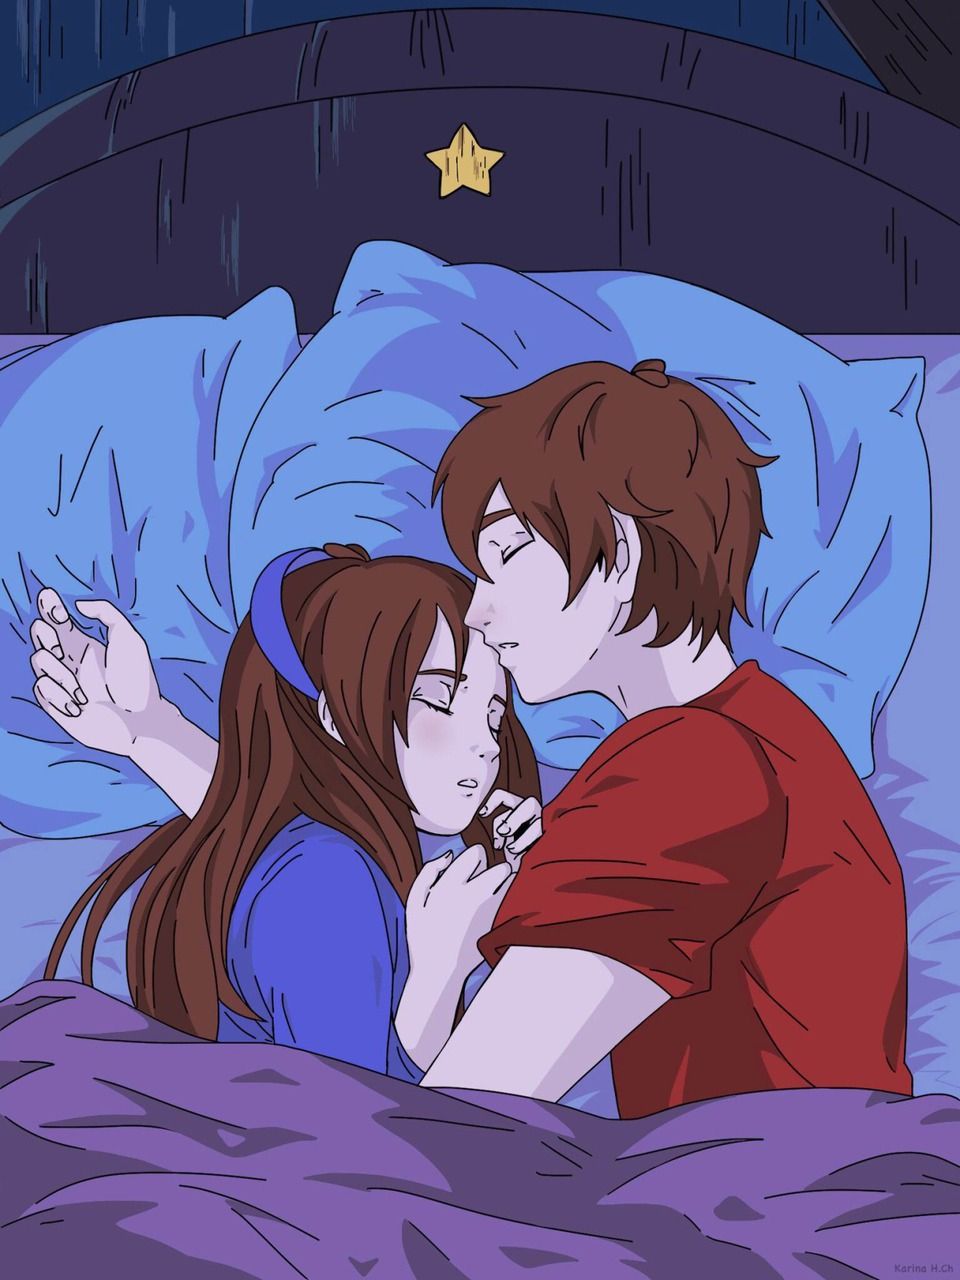 Sleeping Anime Couples Wallpapers - Wallpaper Cave